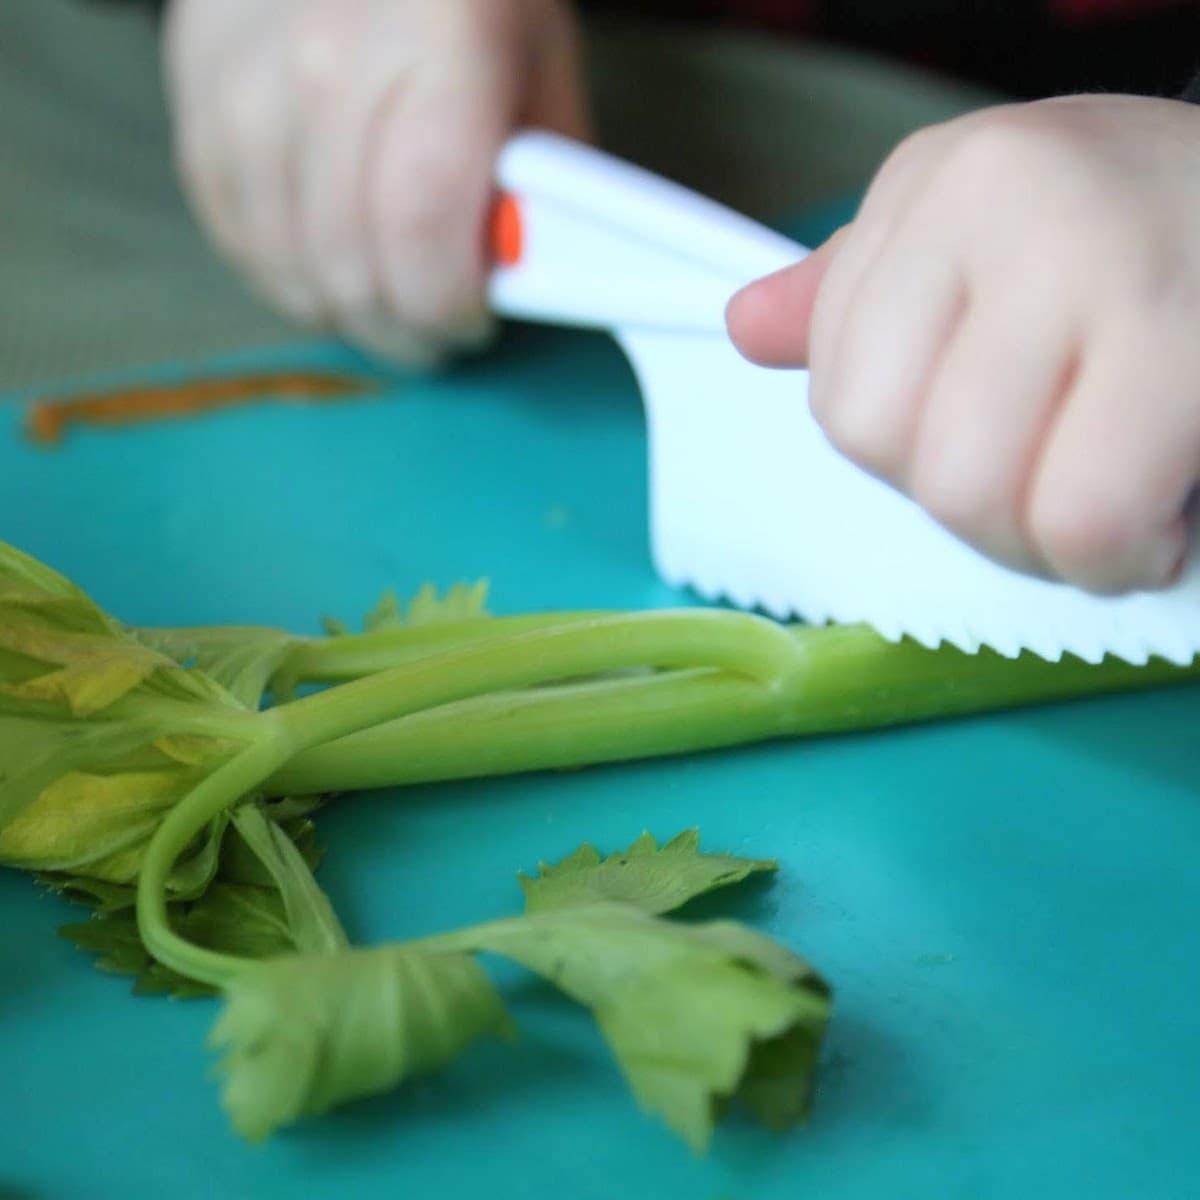 child cutting celery on a teal cutting board